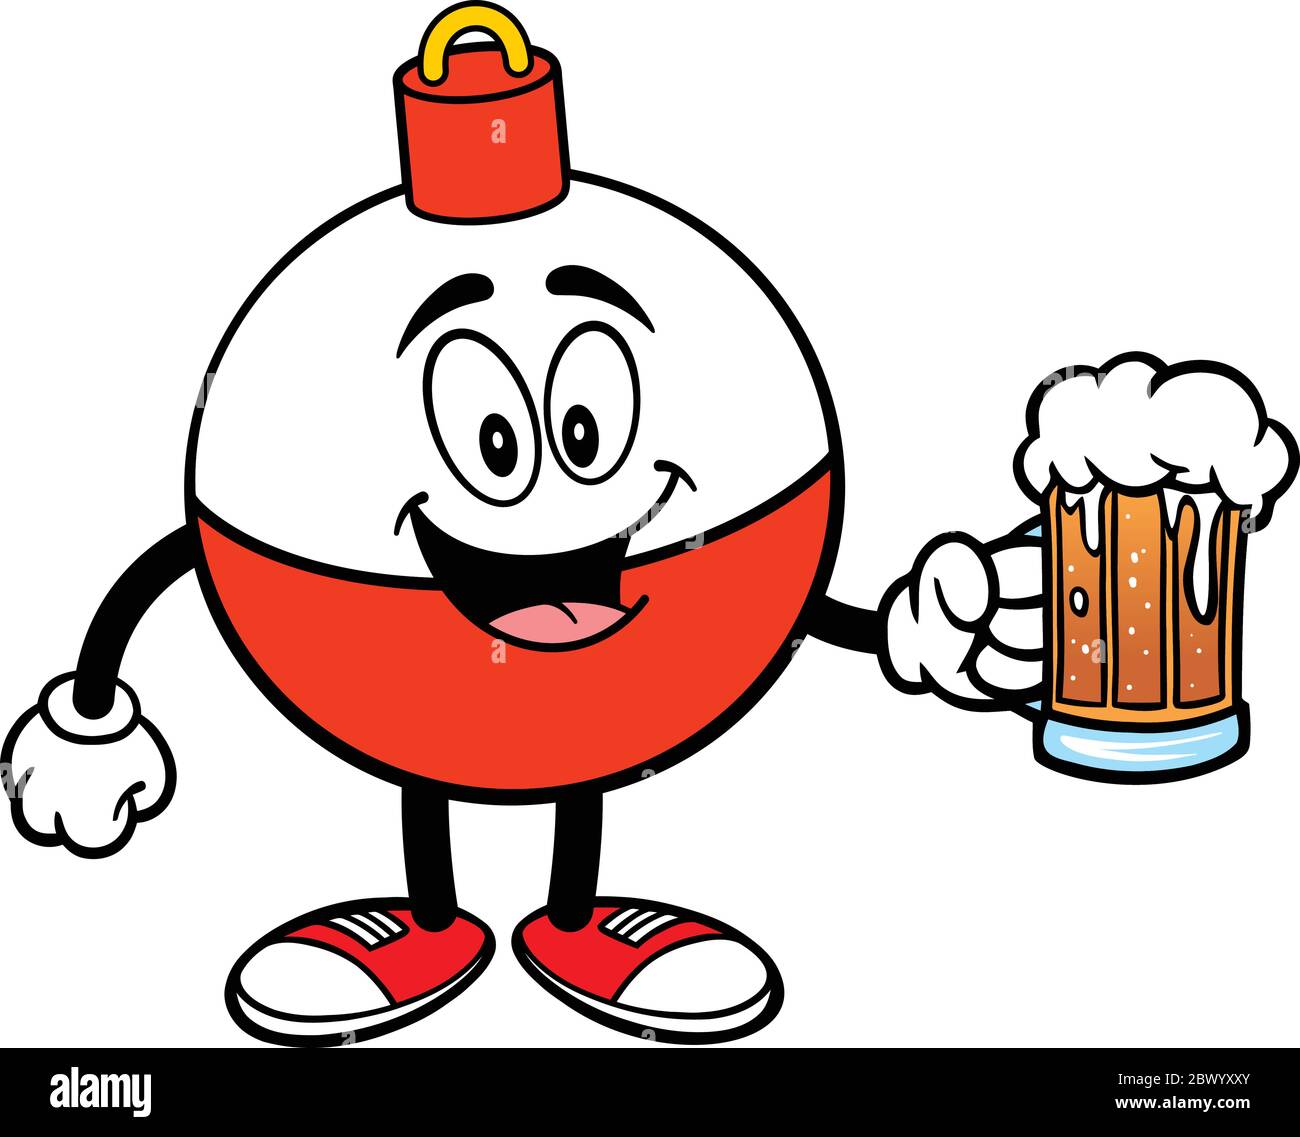 https://c8.alamy.com/comp/2BWYXXY/fishing-bobber-mascot-with-beer-a-cartoon-illustration-of-a-fishing-bobber-mascot-with-a-beer-2BWYXXY.jpg